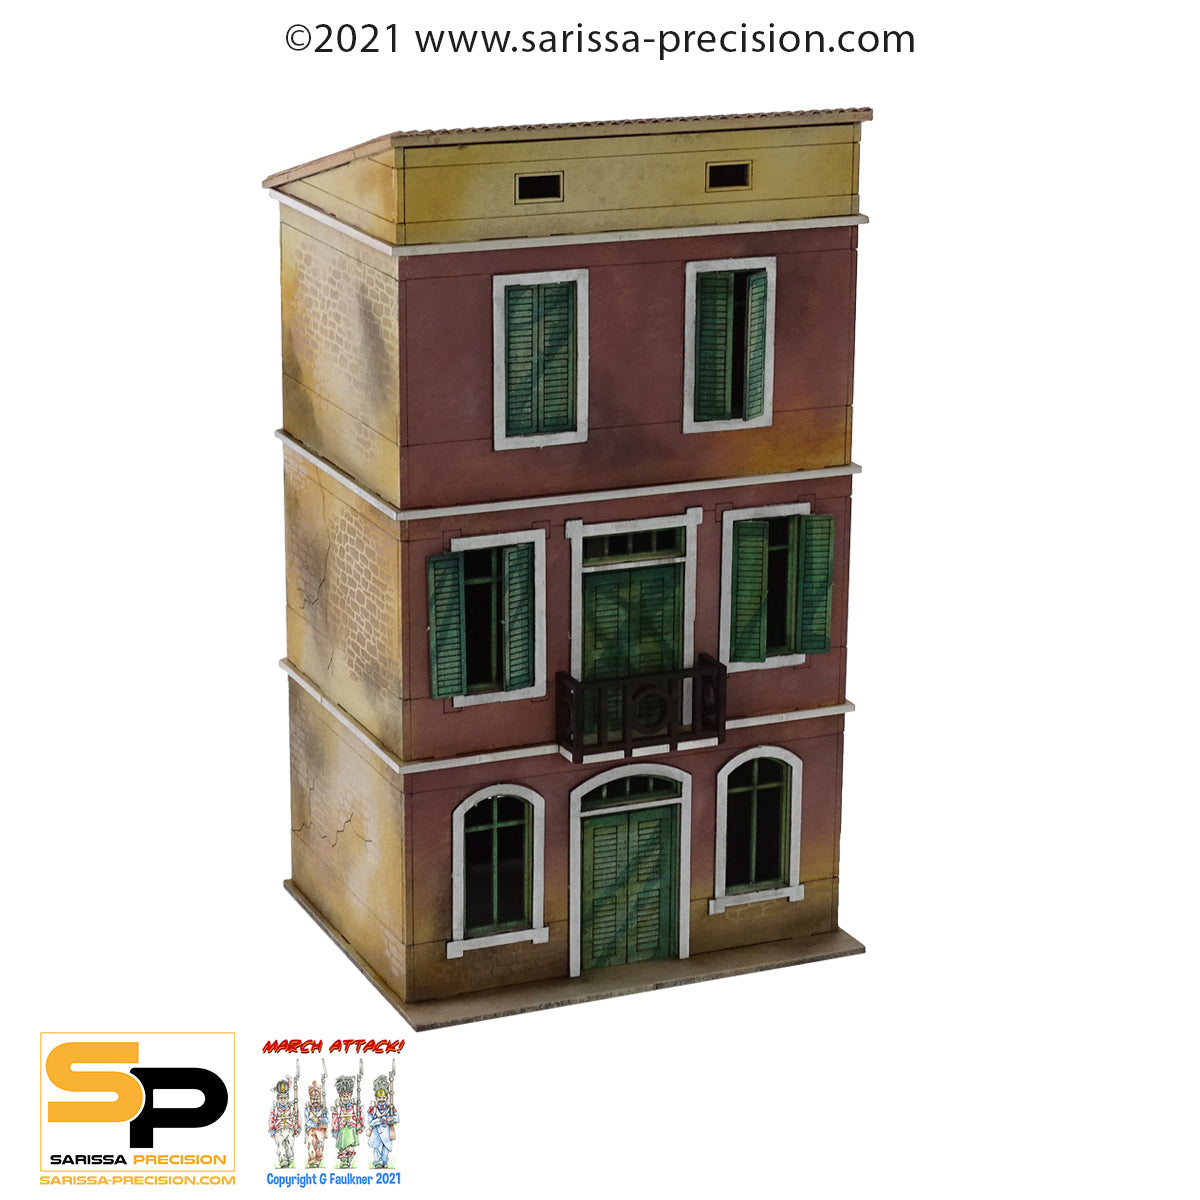 Mediterranean Wide House - 3 Floors with Balcony and Sloped Roof